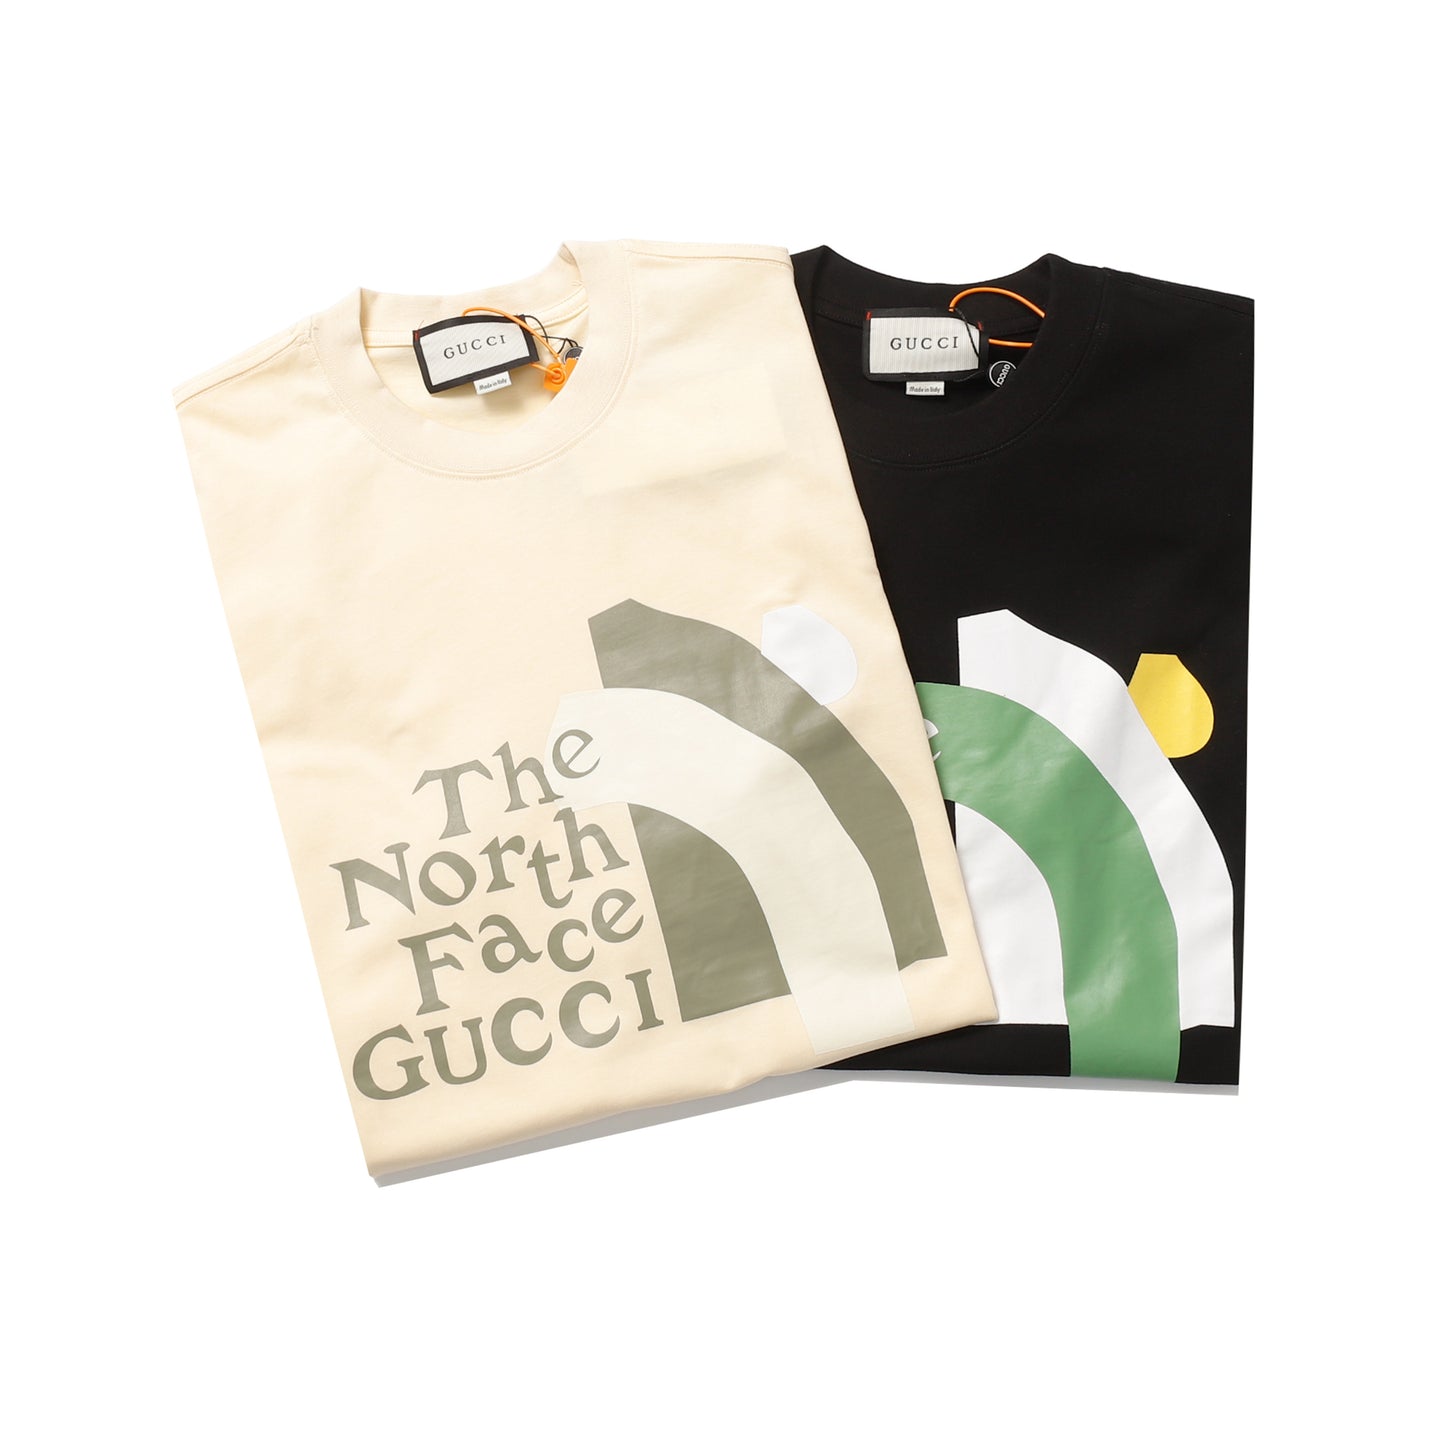 Gucci x The North Face T-Shirt